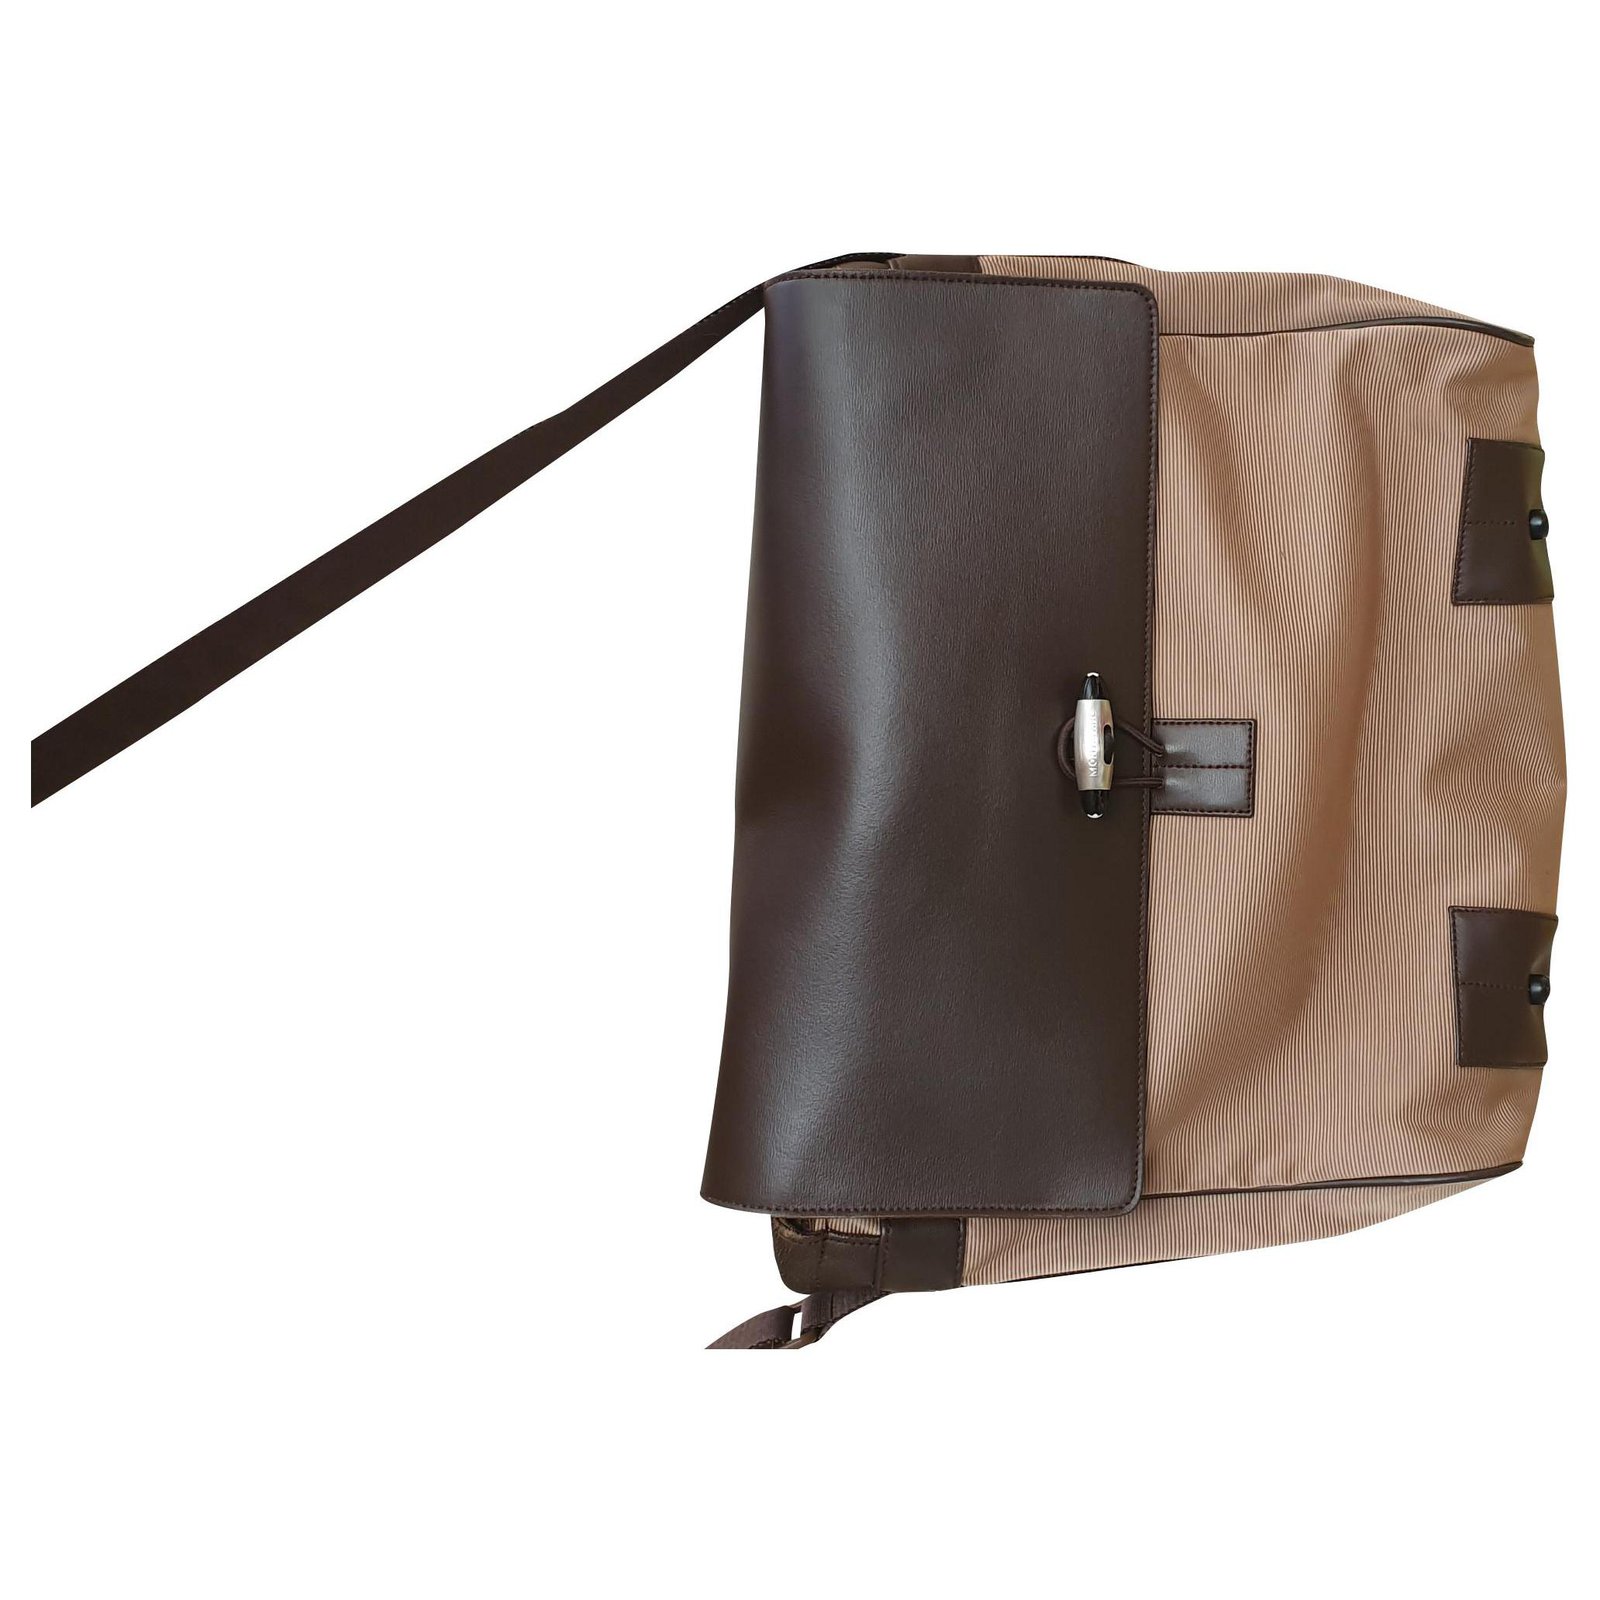 New Branded Replica First Copy Laptop Bags For Men in India Cheap Price